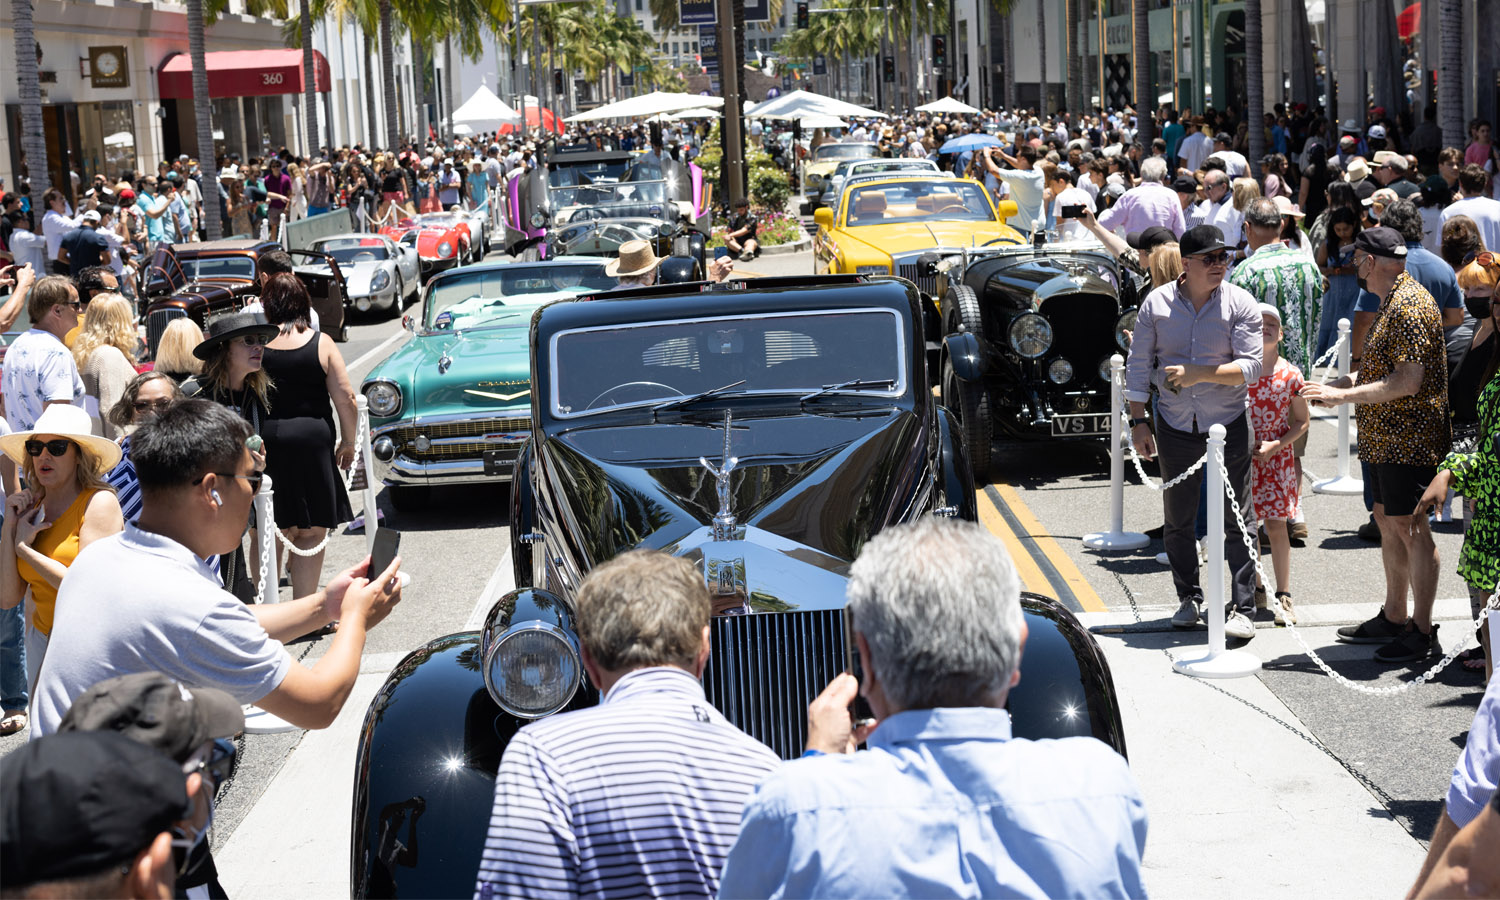 Rodeo Drive Concours d'Elegance Featured Over 100 Cars and 40,000